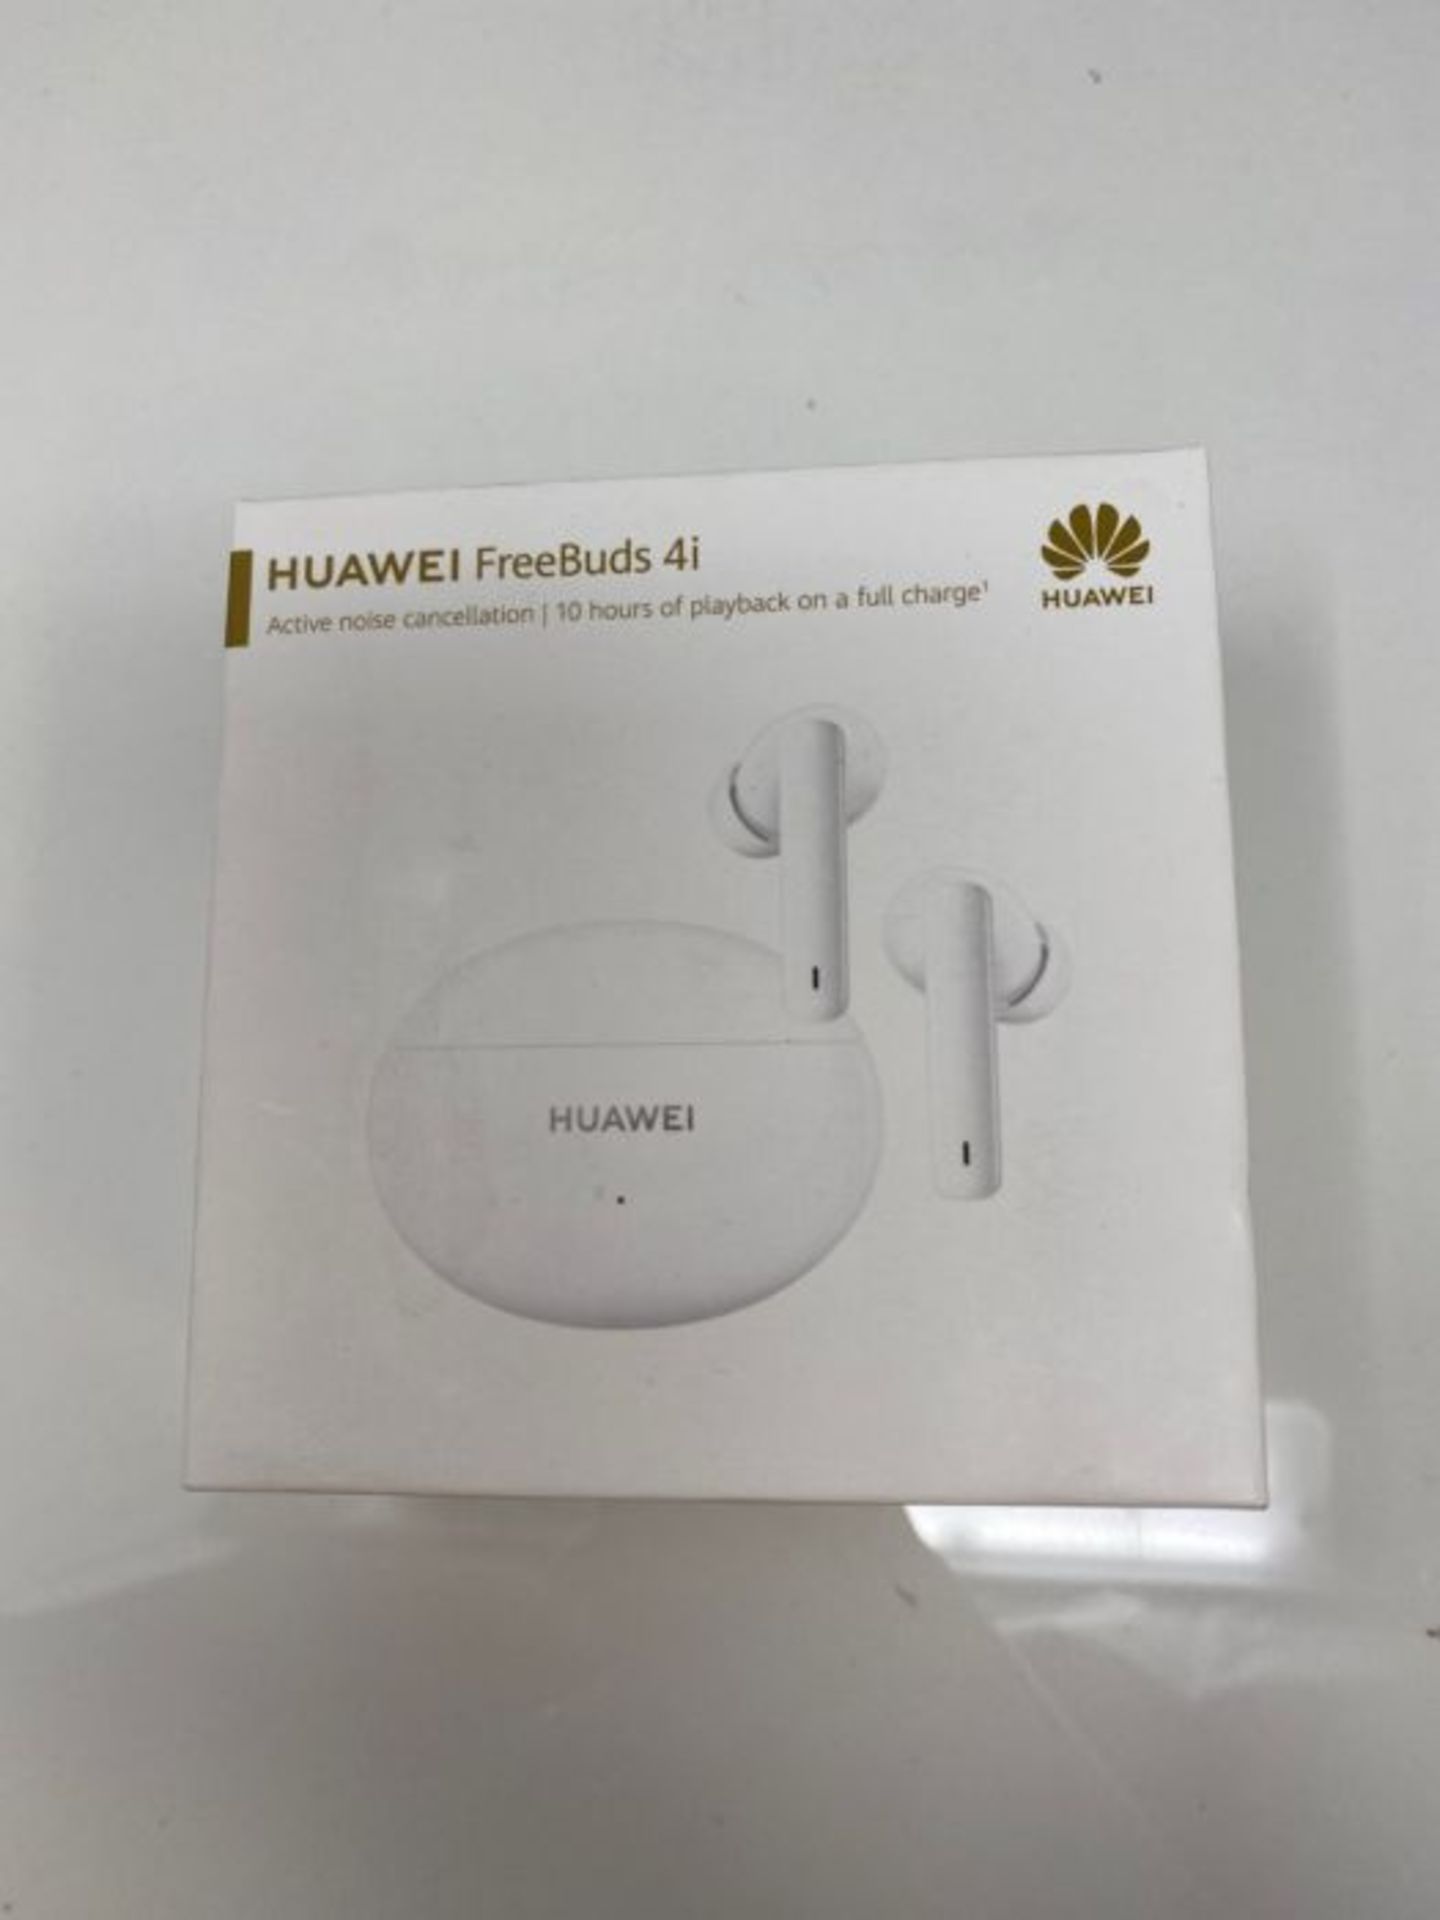 RRP £59.00 HUAWEI FreeBuds 4i Wireless In-Ear Bluetooth Headphones with Active Noise Cancellation - Image 2 of 3